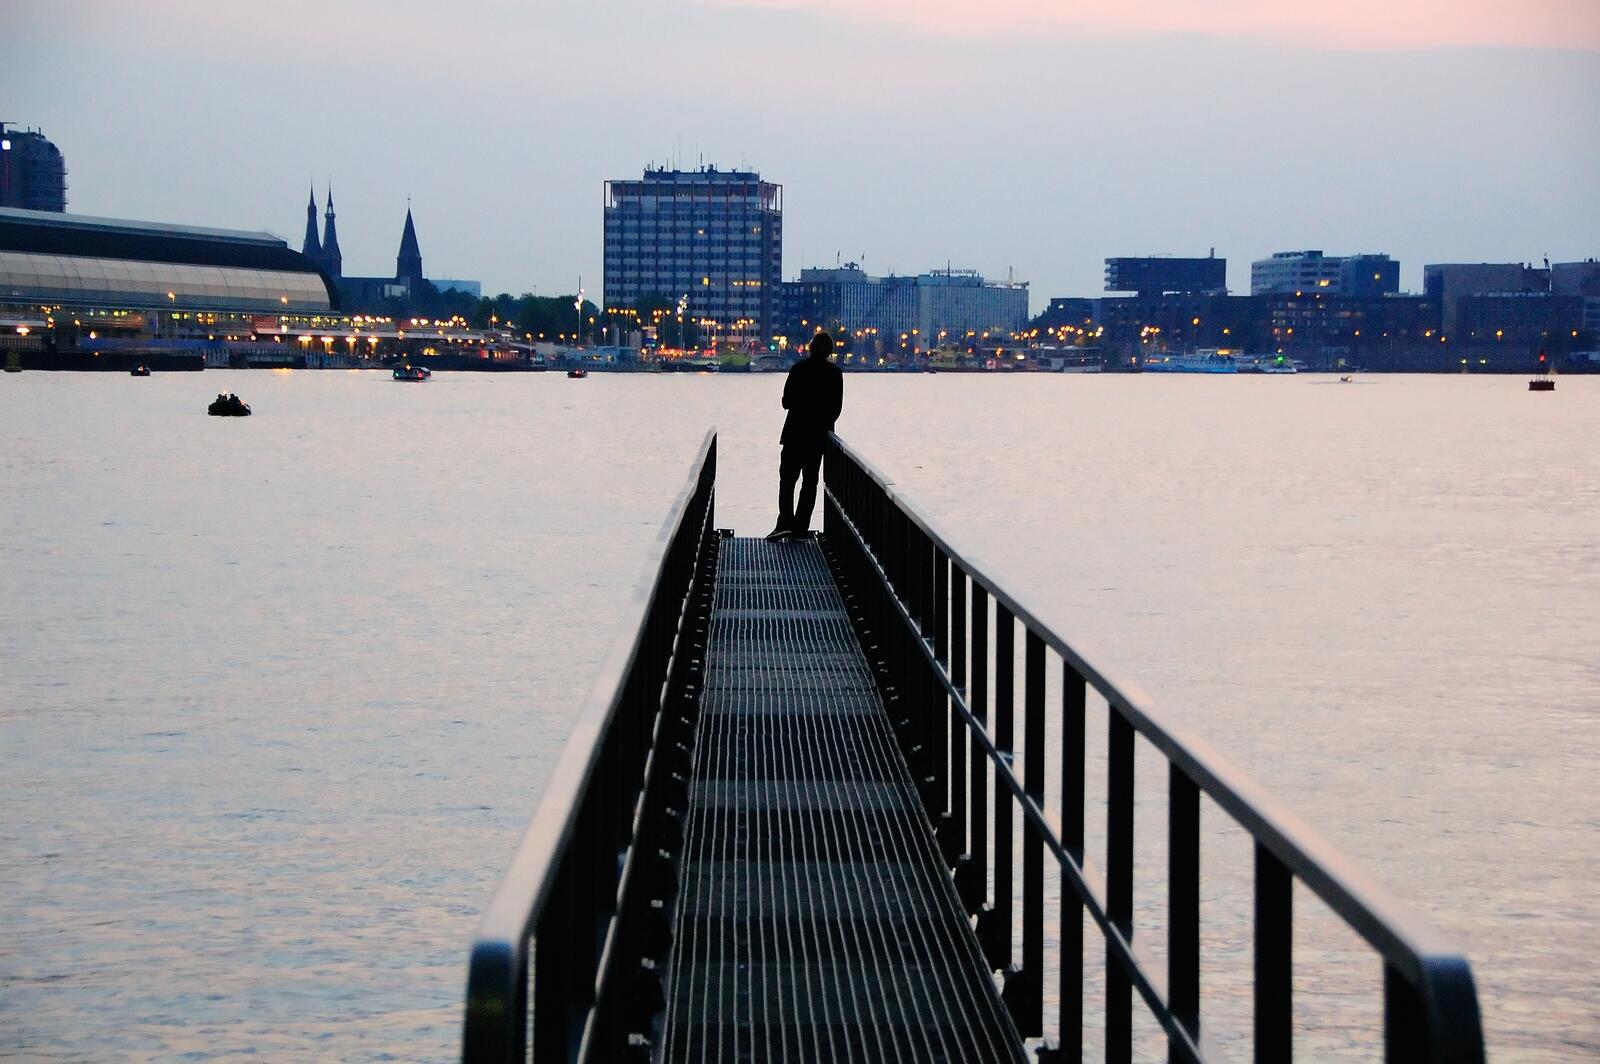 Free photo A man stands on the edge of a pier overlooking the city